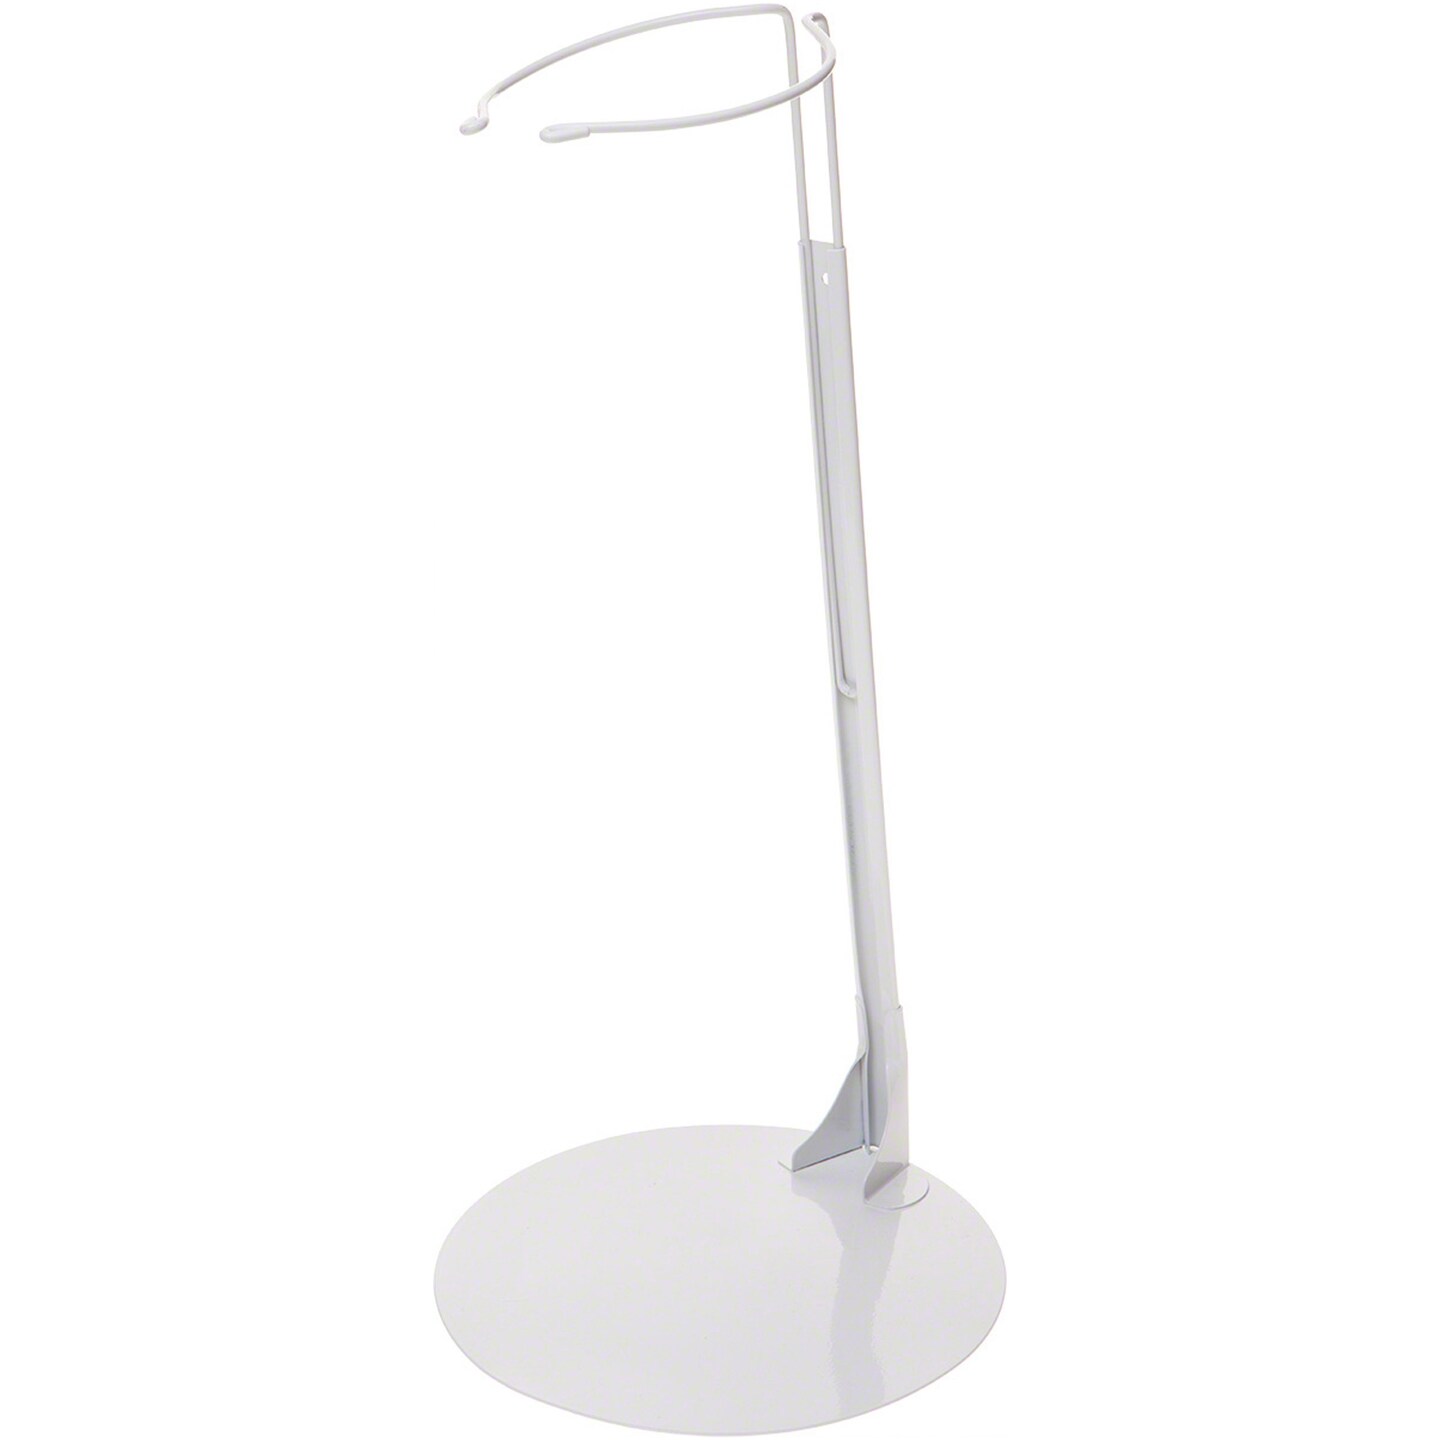 Kaiser 6001 White Adjustable Doll Stand, fits 34 to 48 inch Dolls, waist width adjusts from 4.75 to 6 inches